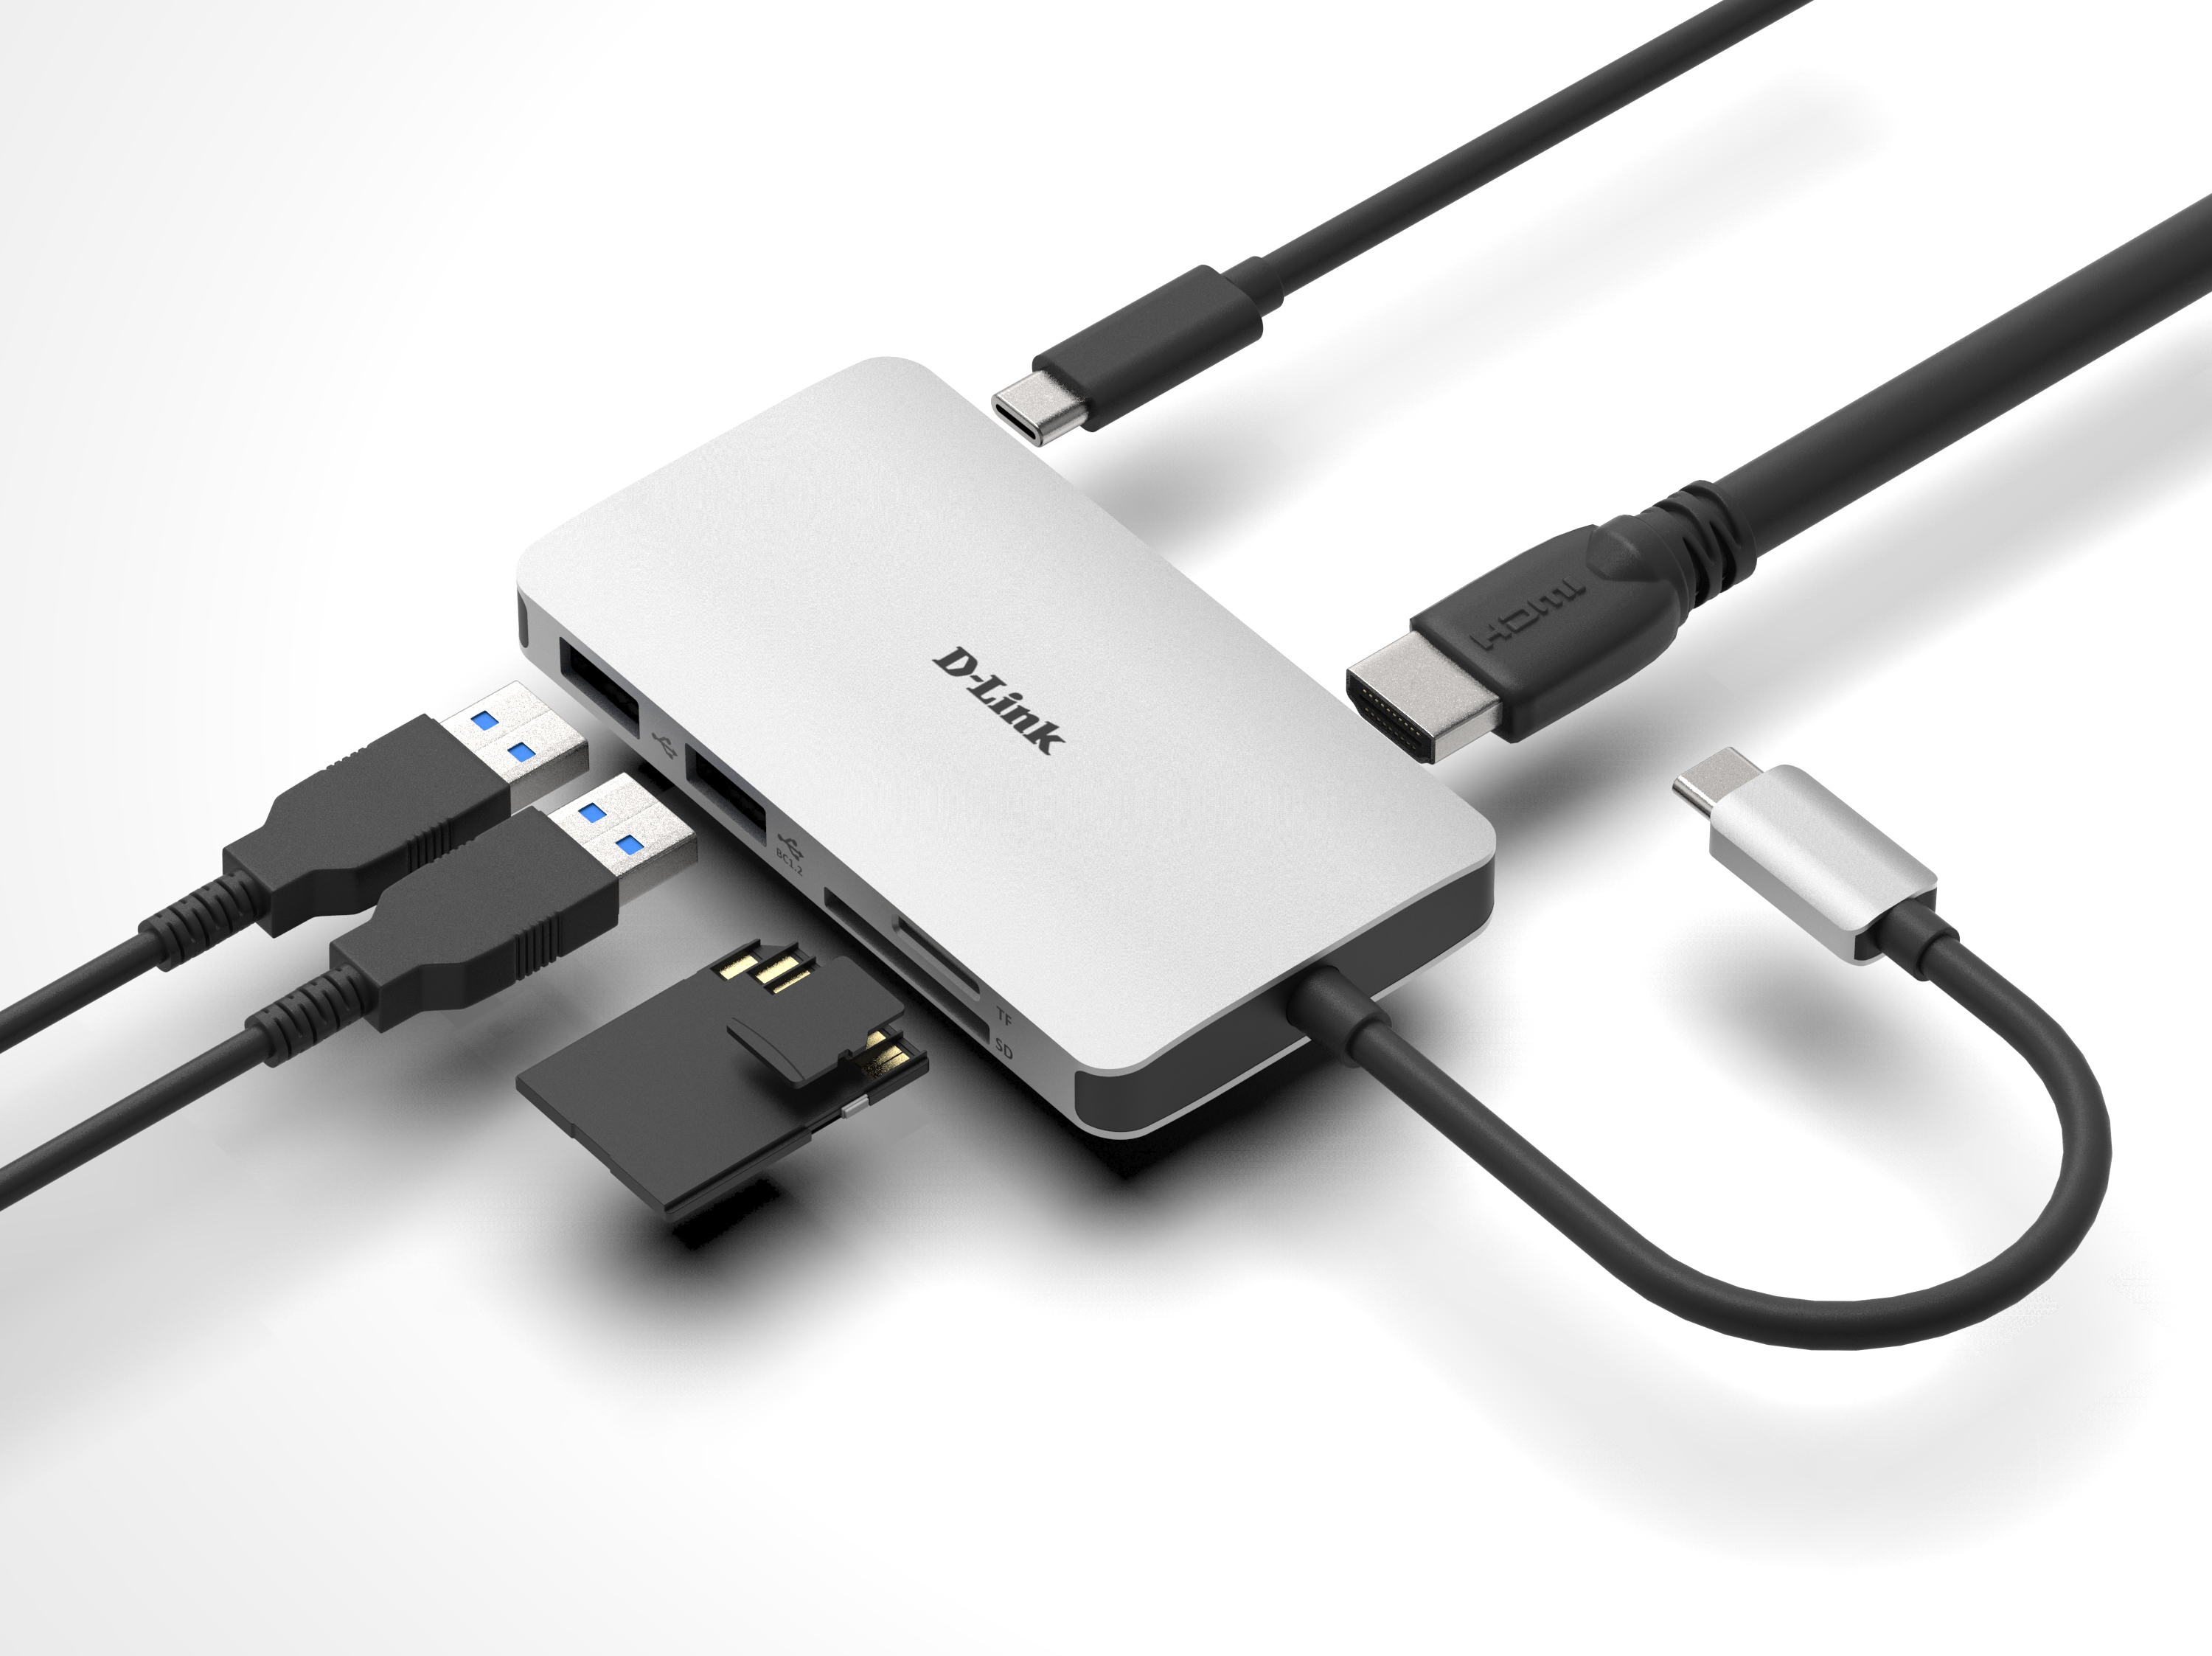 DUB-M610 6-in-1 USB-C Hub with HDMI/Card Reader/Power Delivery - example connections